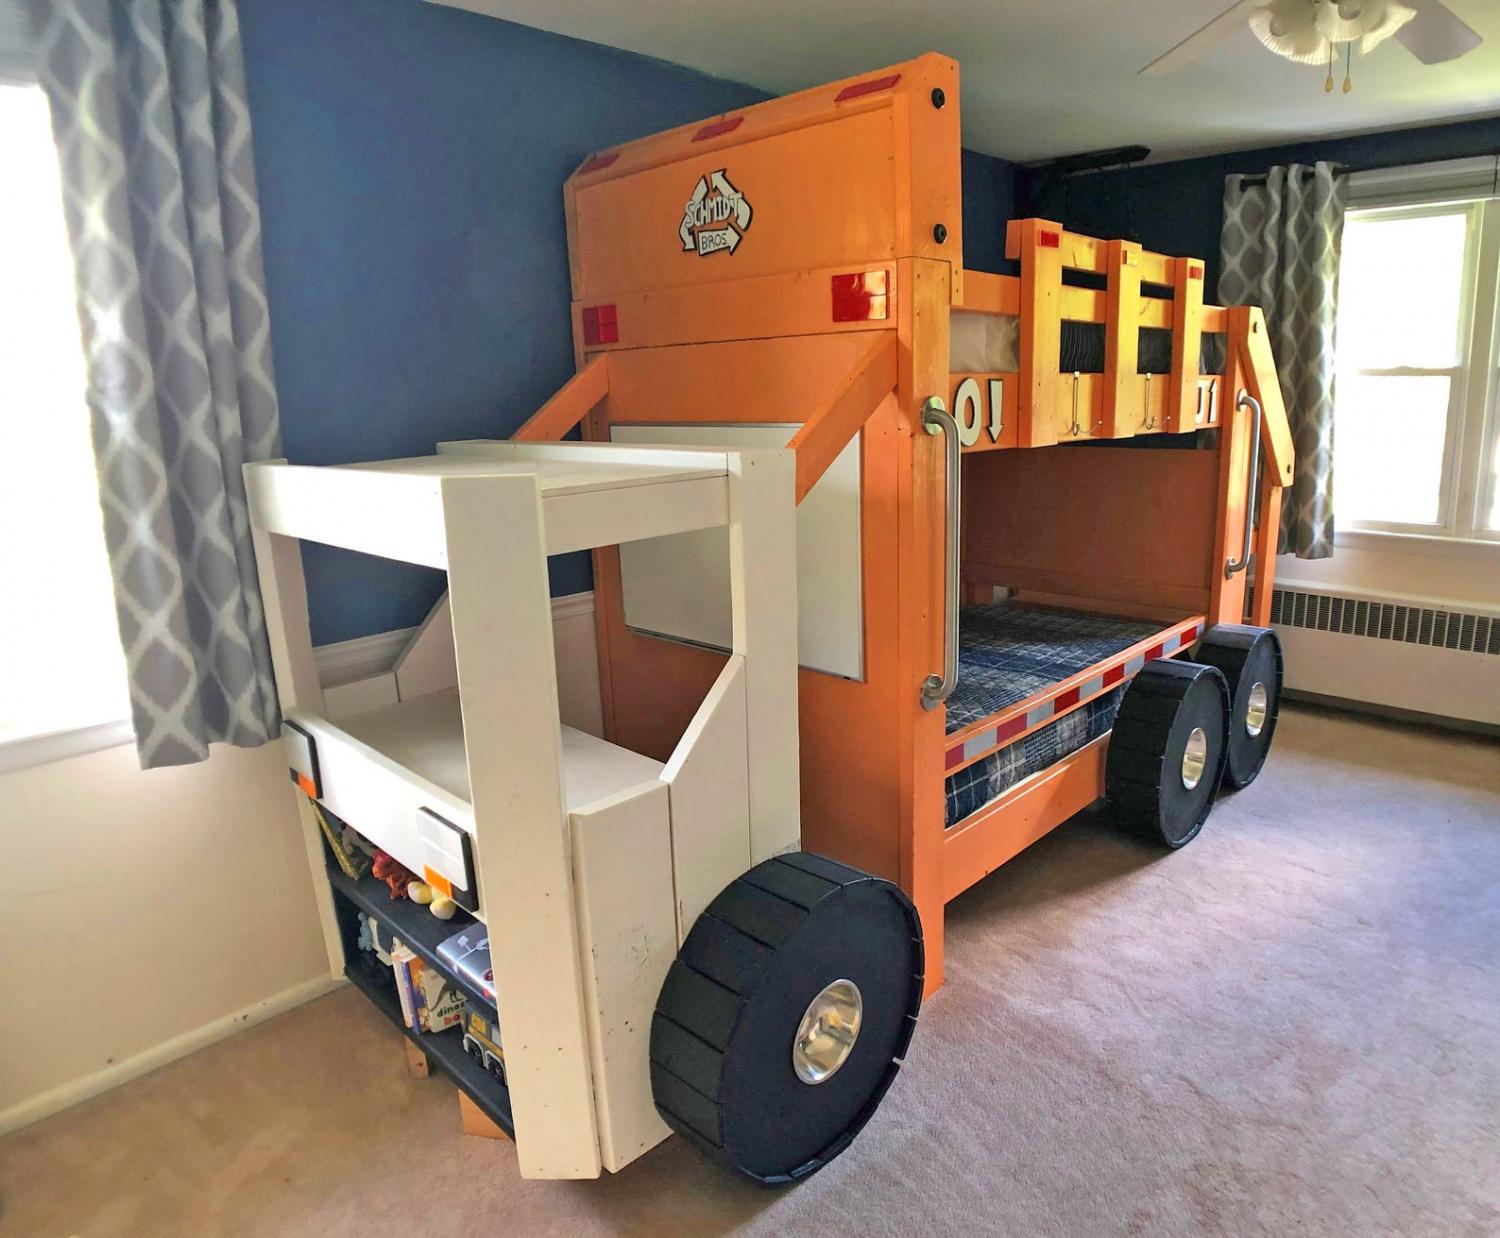 This Garbage Truck Bunk Bed Has A Desk, Truck Bunk Bed